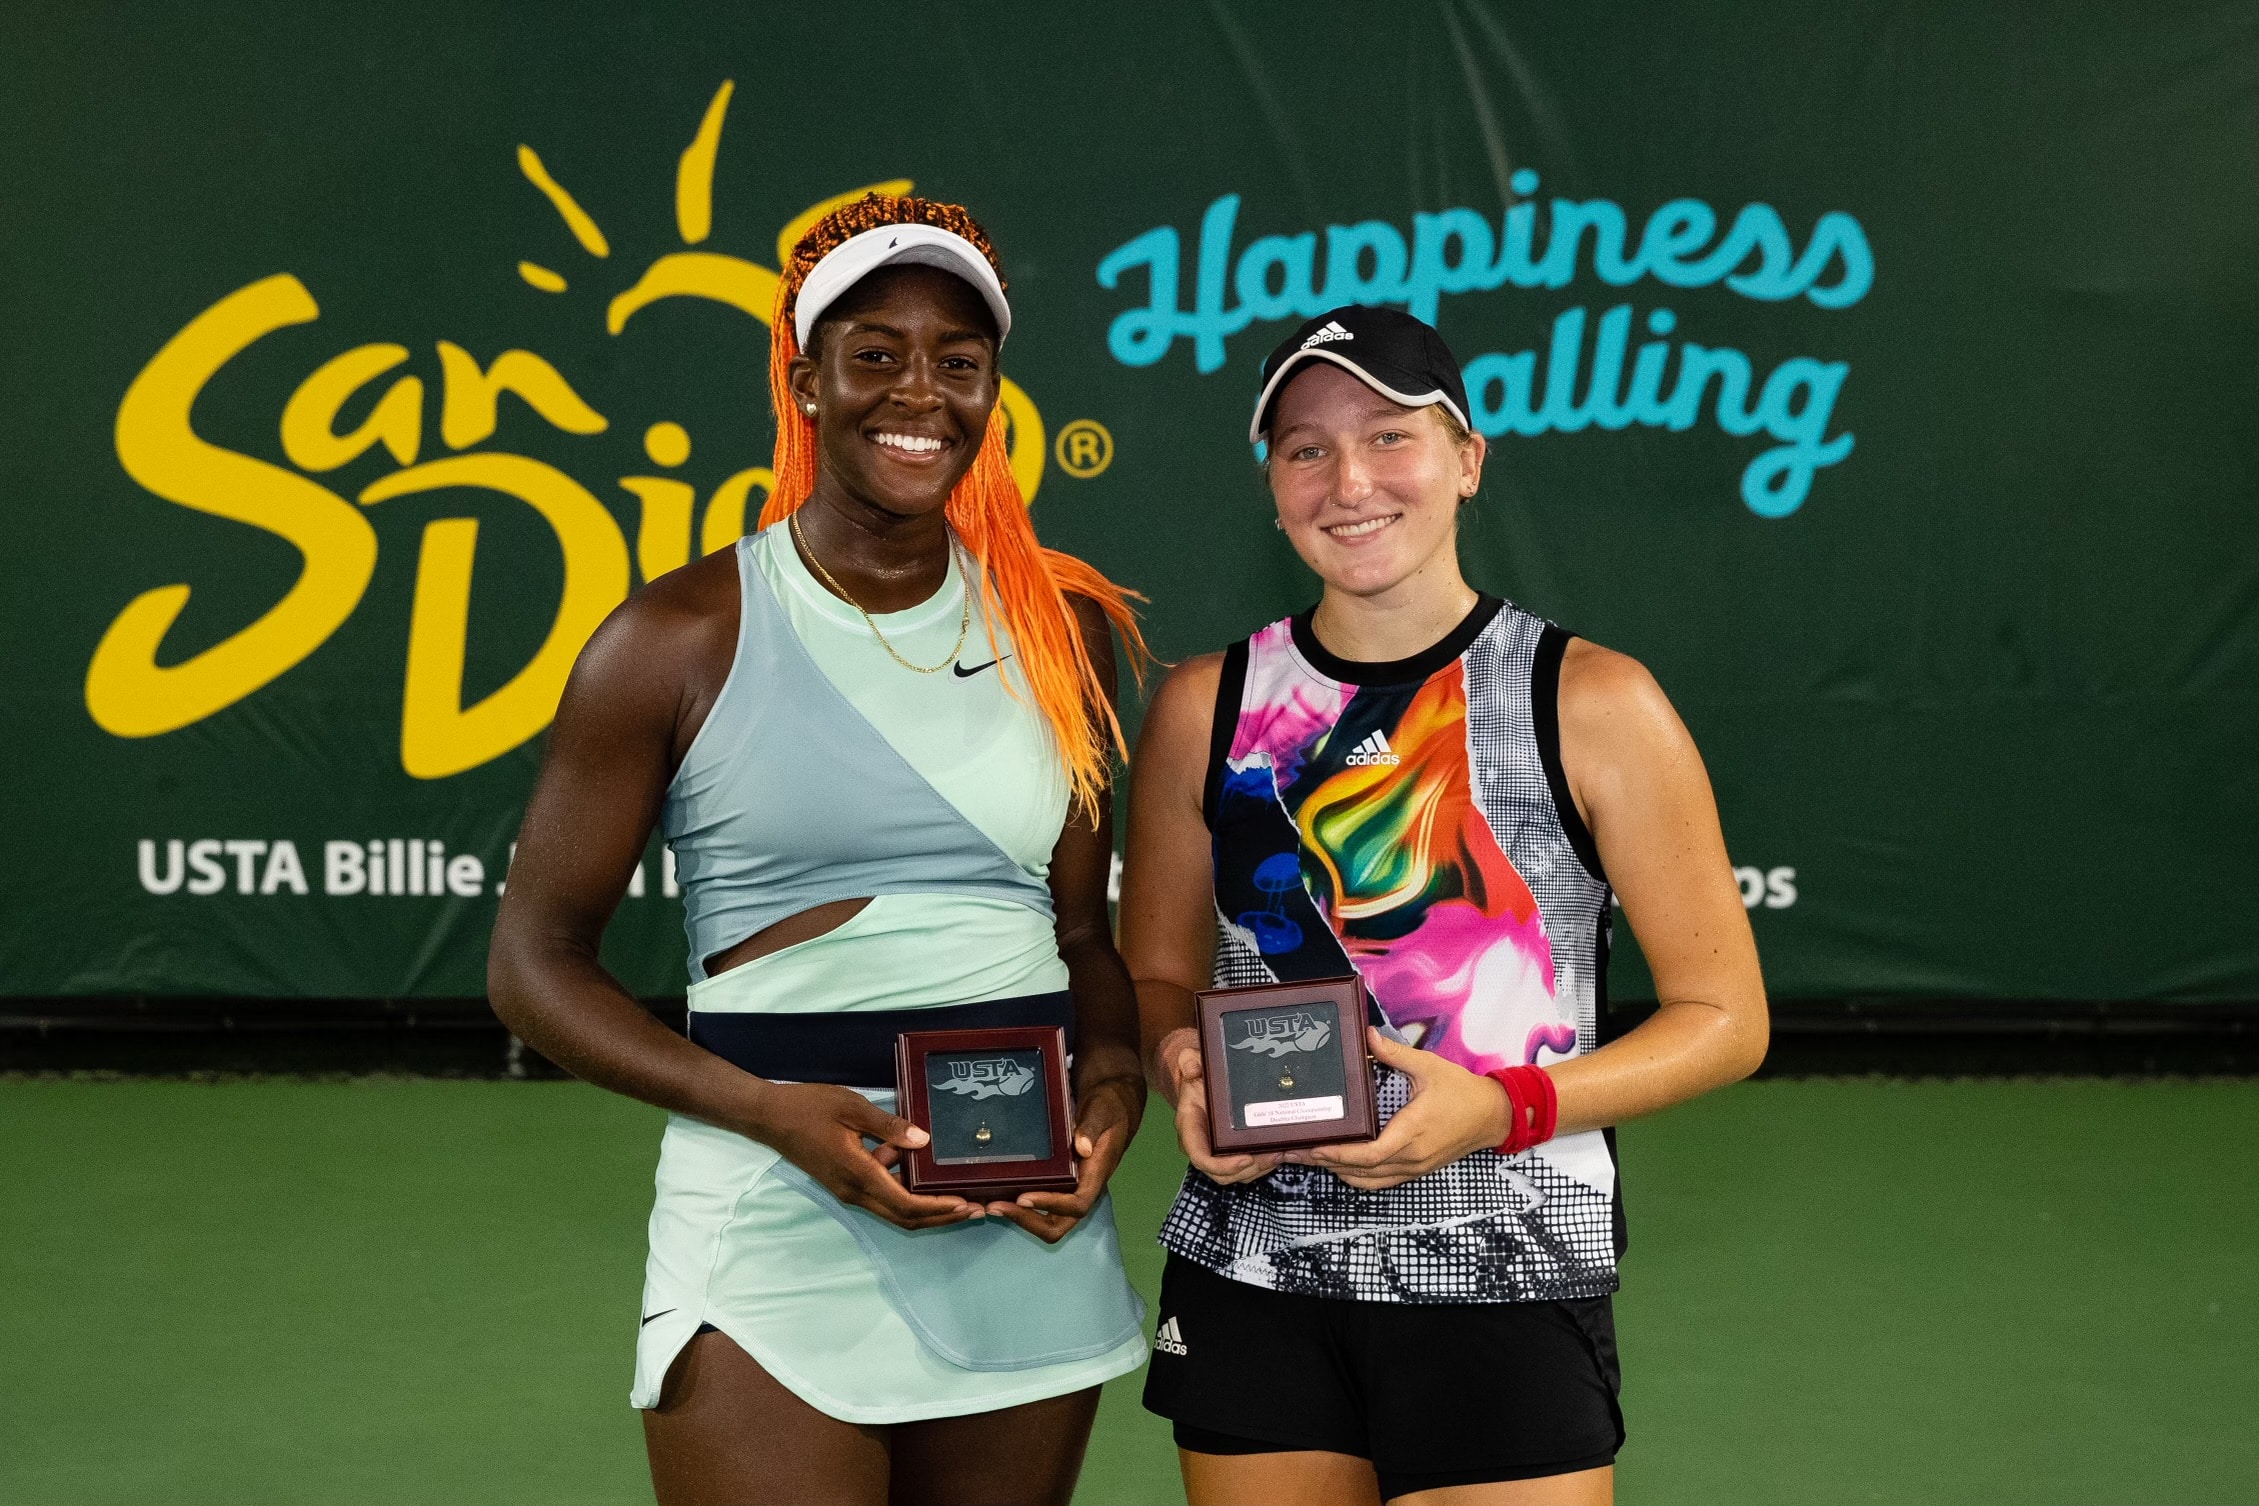 Brantmeier Wins USTA National Doubles Championship, Earns Spot in US